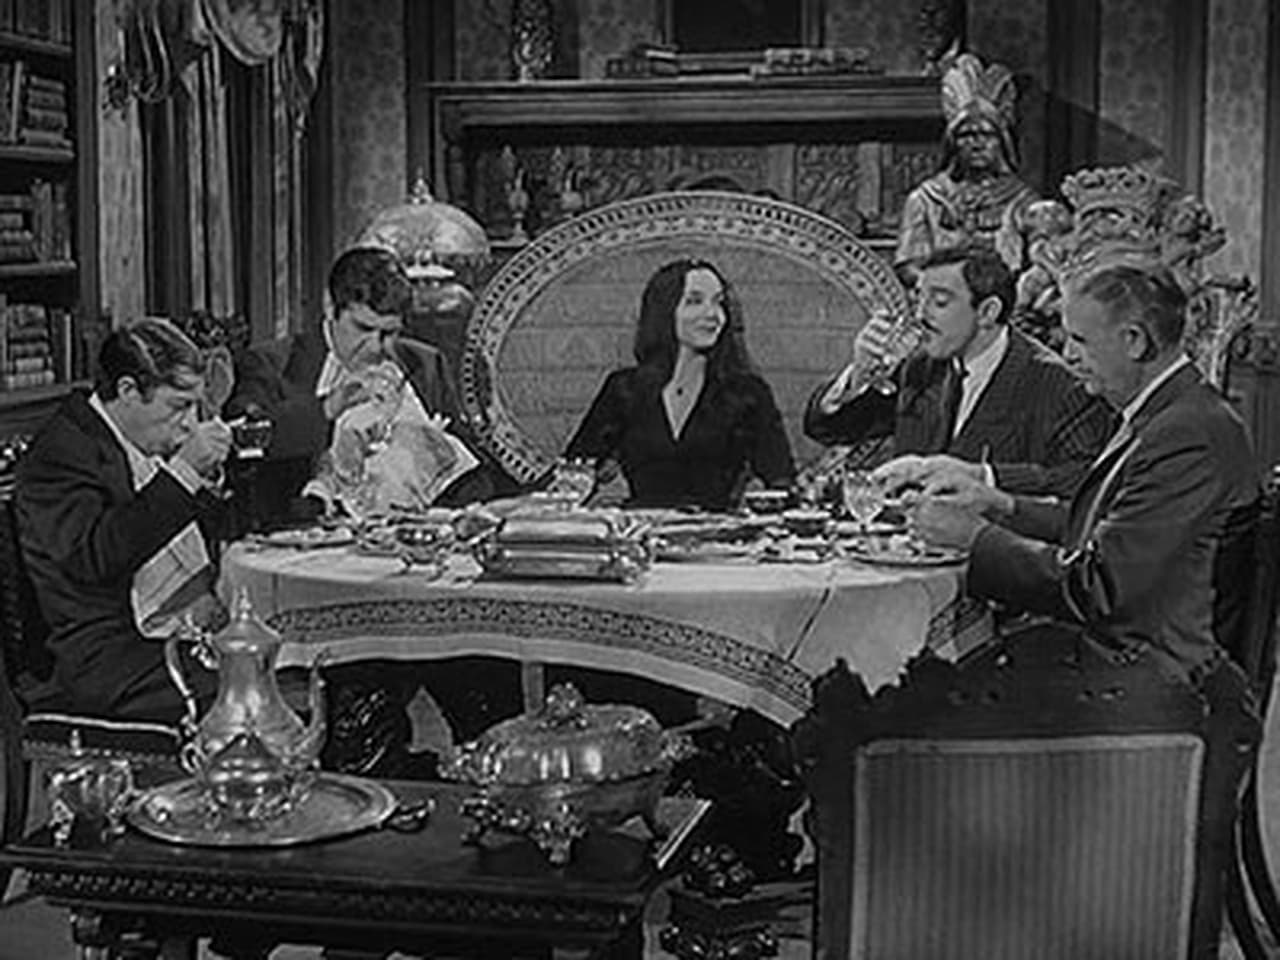 The Addams Family - Season 1 Episode 11 : The Addams Family Meet the VIPs